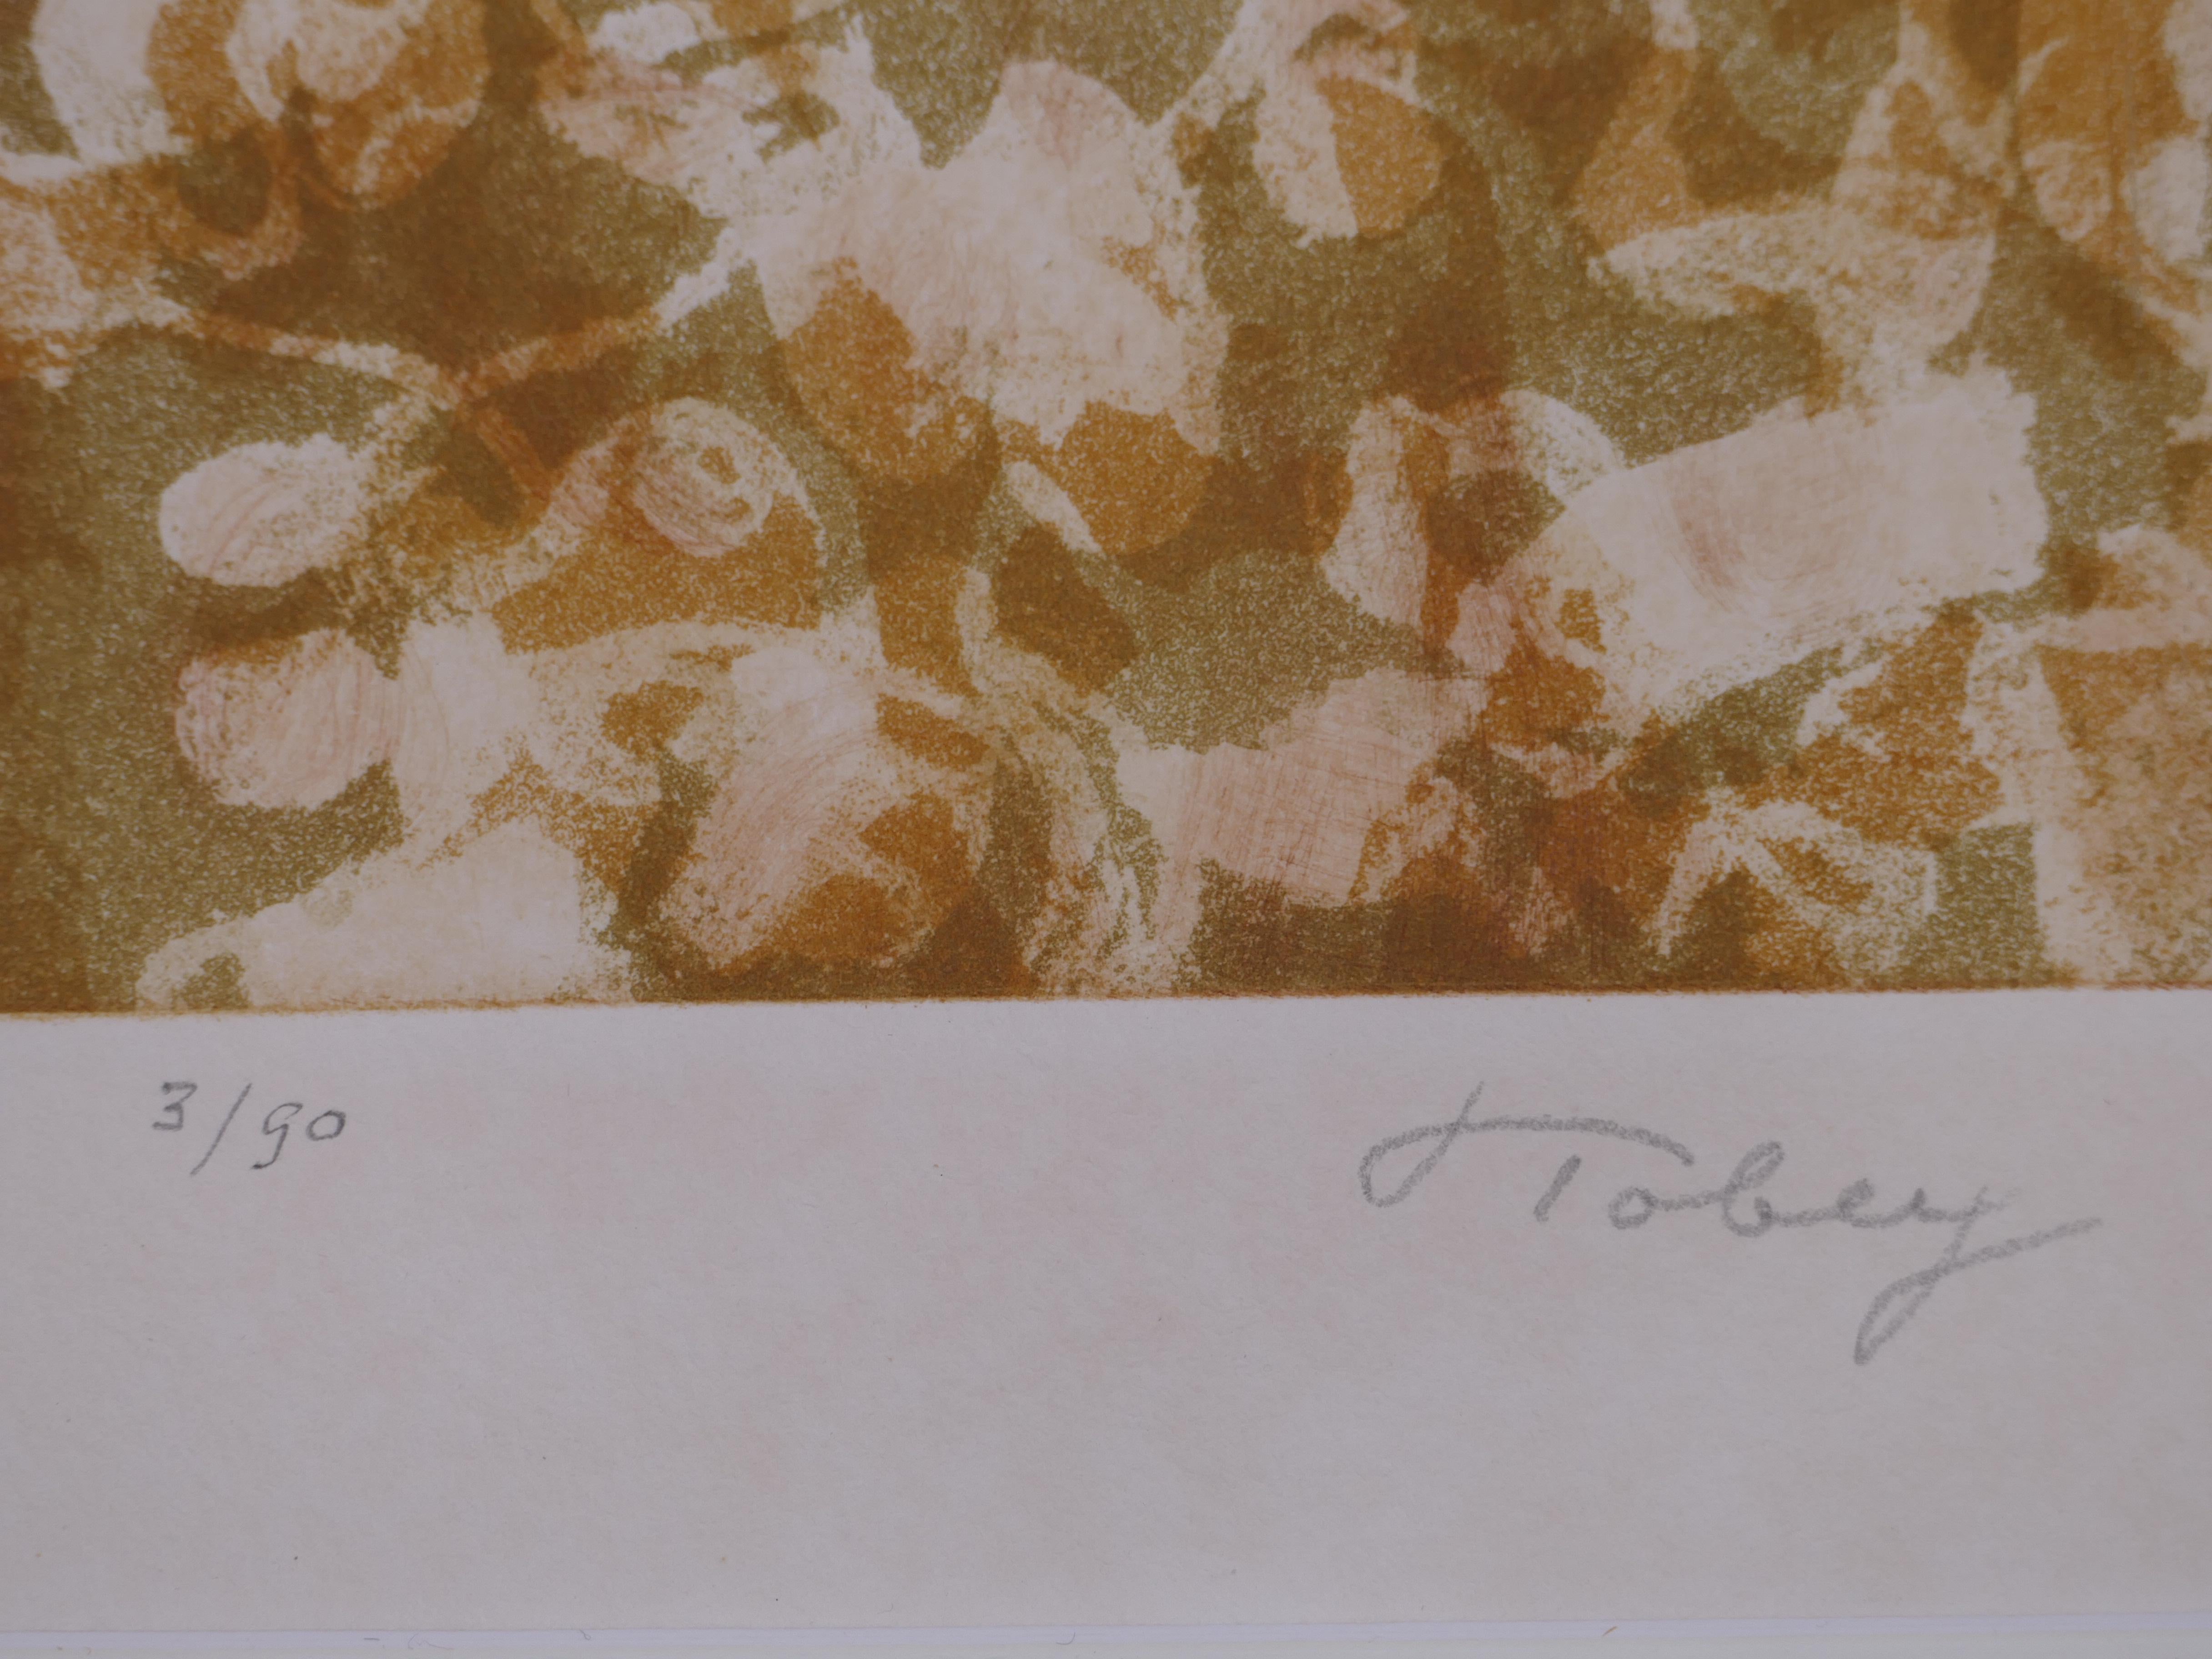 Golden Days - Original Etching and Aquatint by Mark Tobey - 1974 3